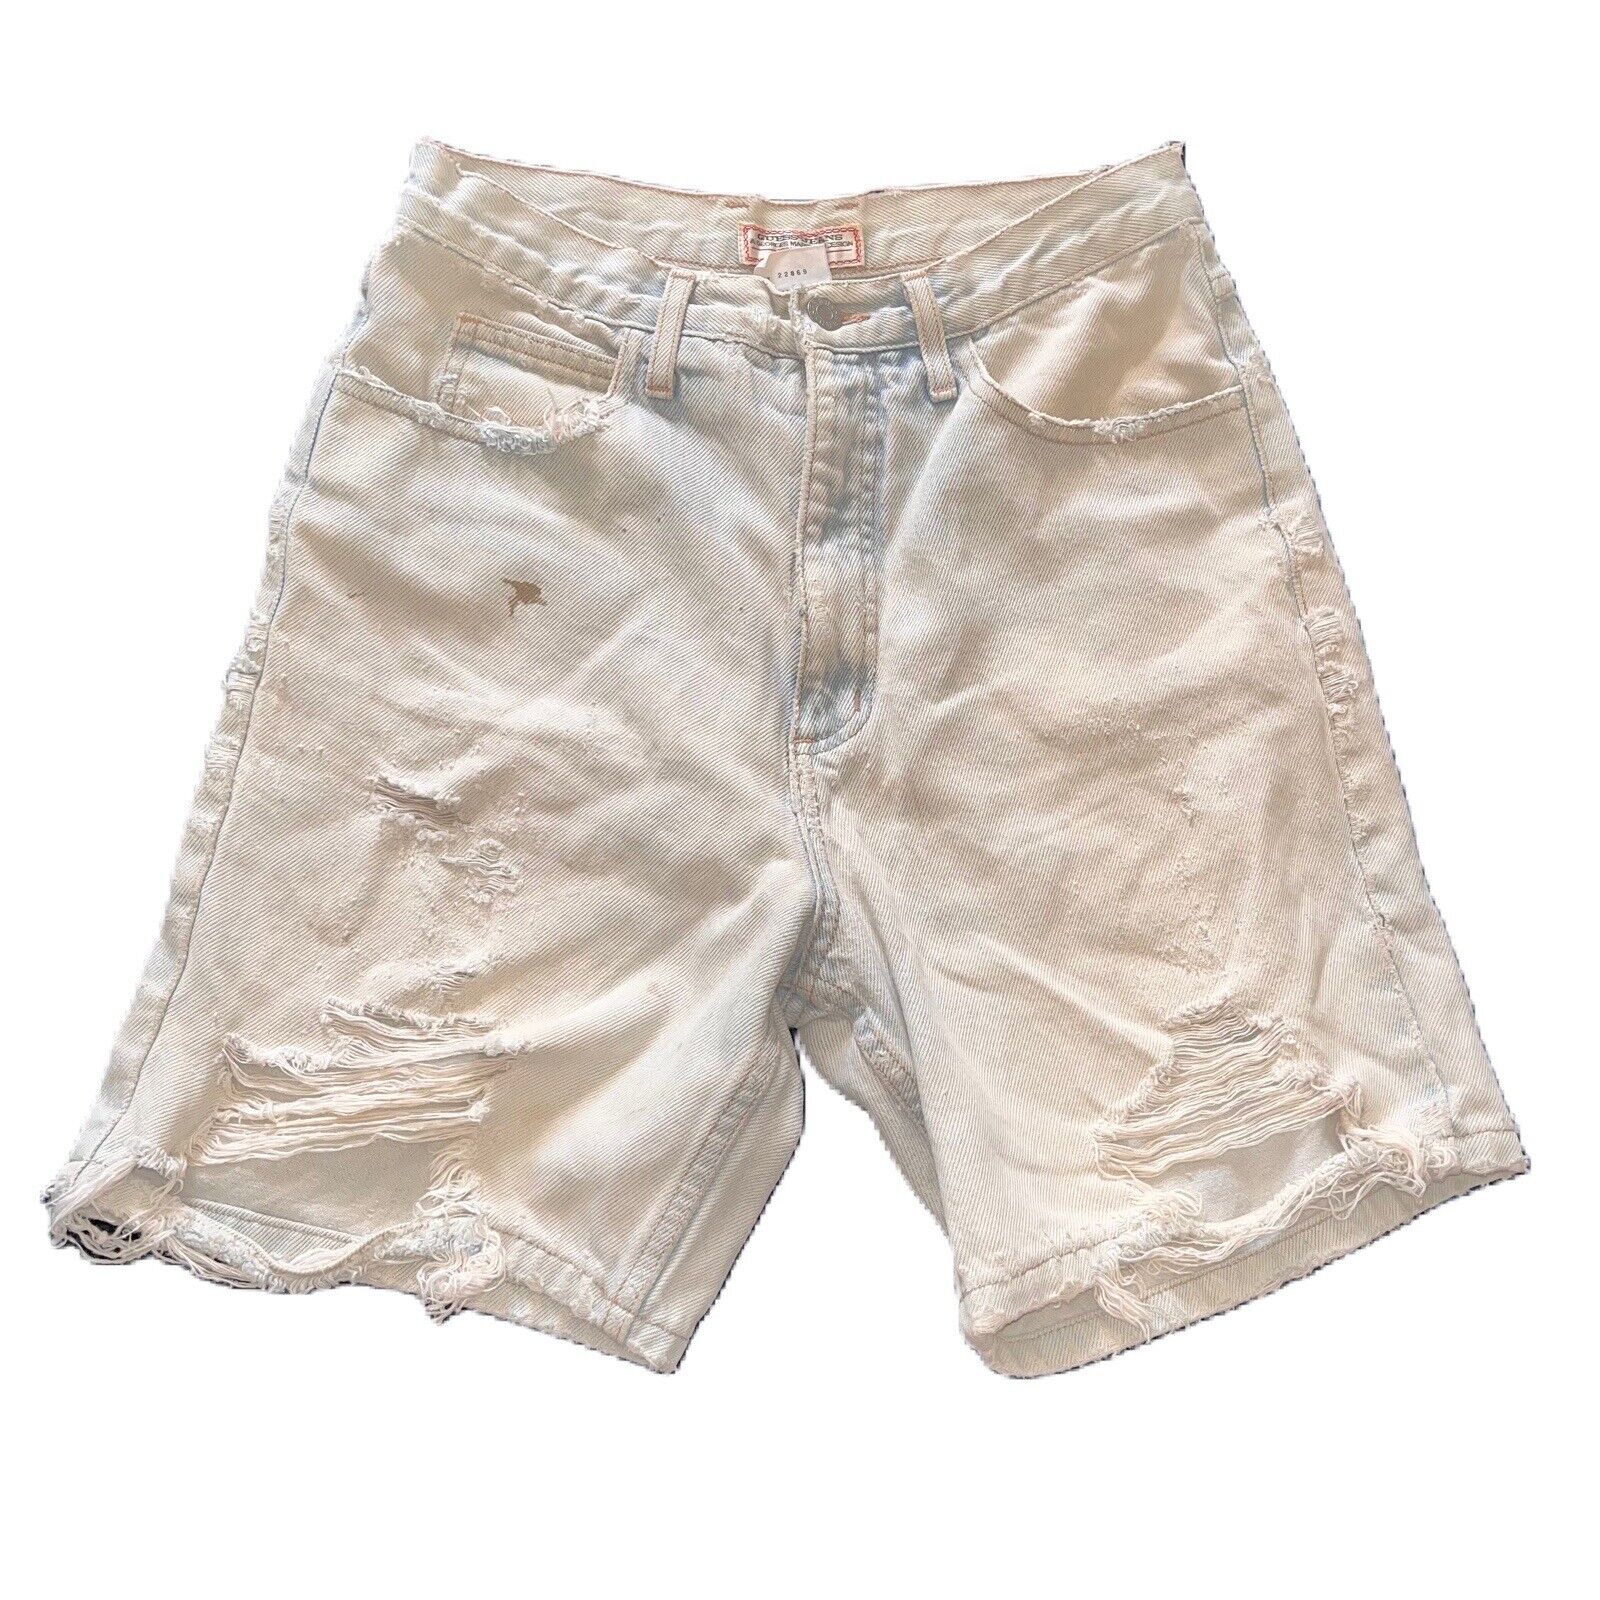 Vtg Guess Jeans by George Marciano Shorts Size 30 Distressed Bleached *FLAWS